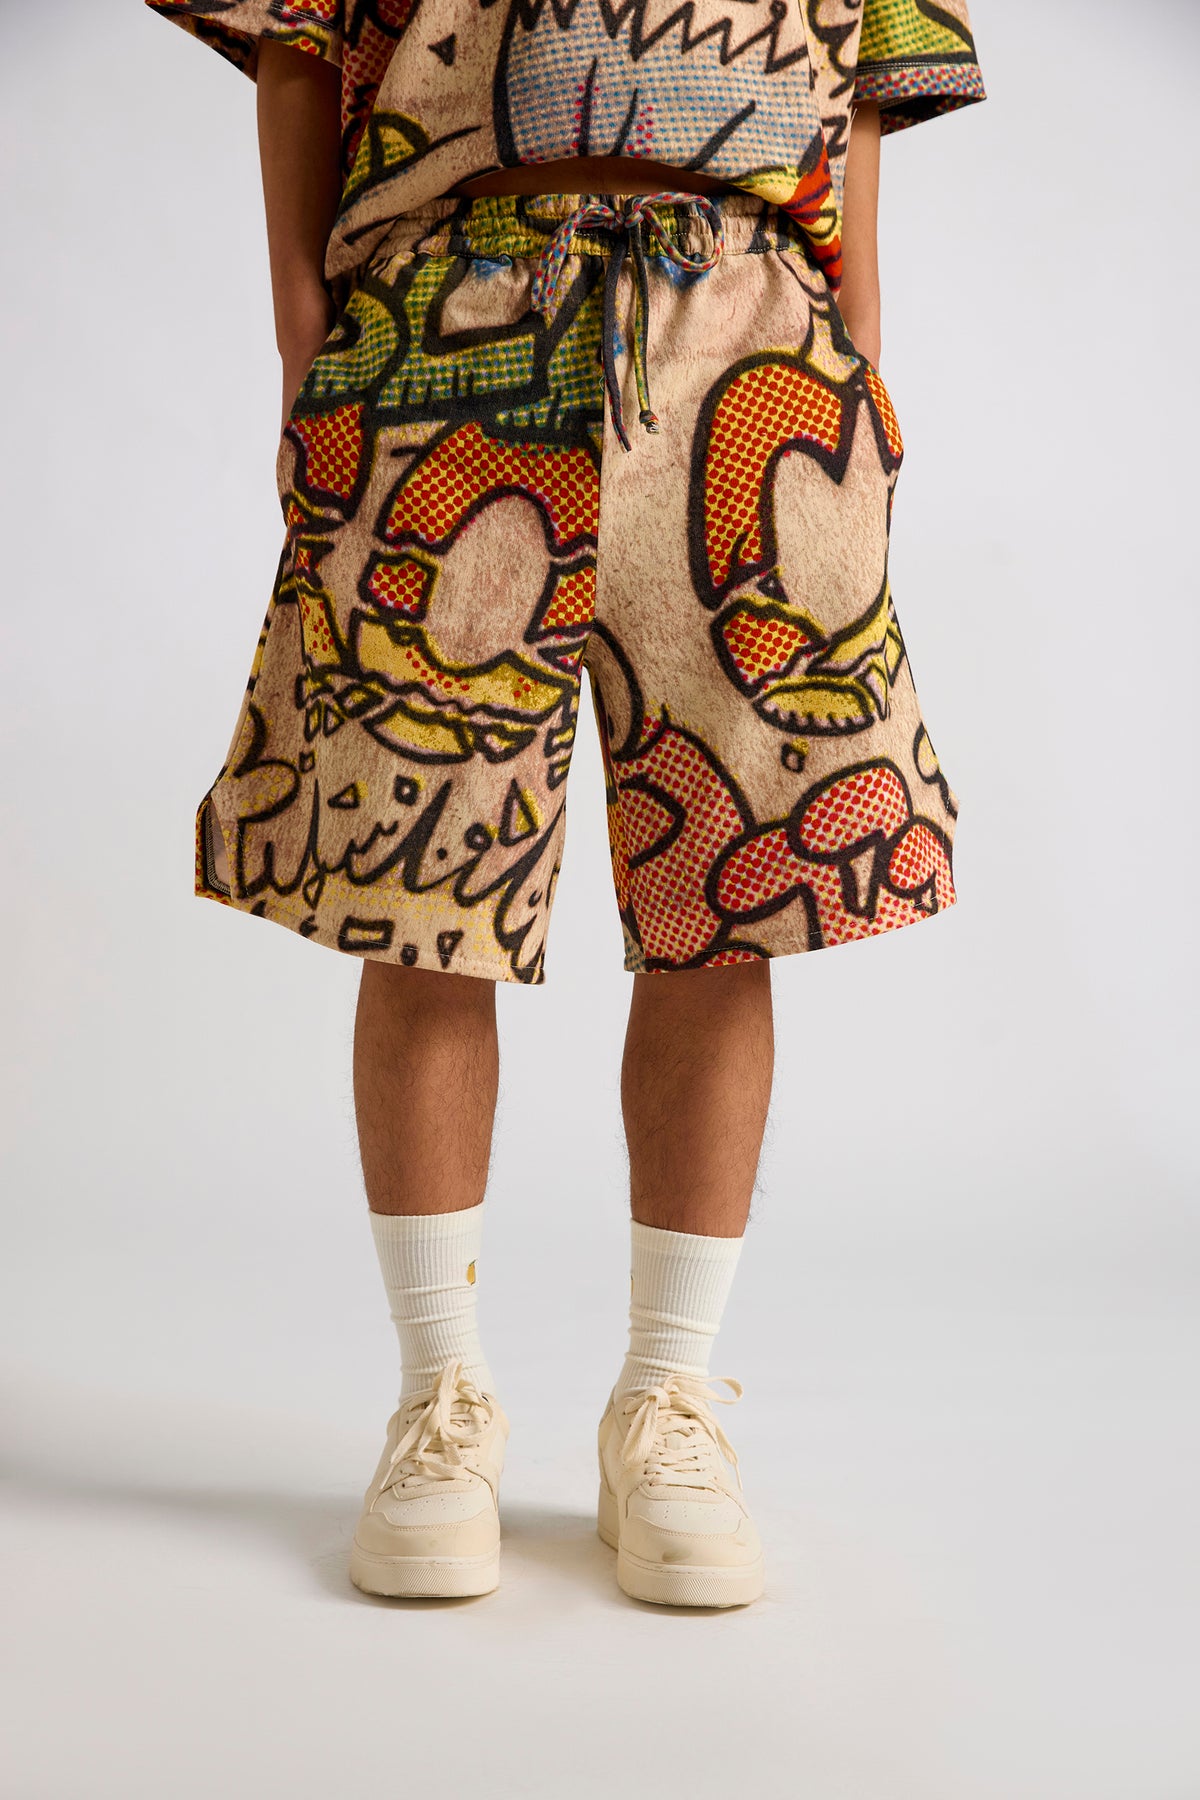 Garfield:Blown Out Printed Men's Shorts